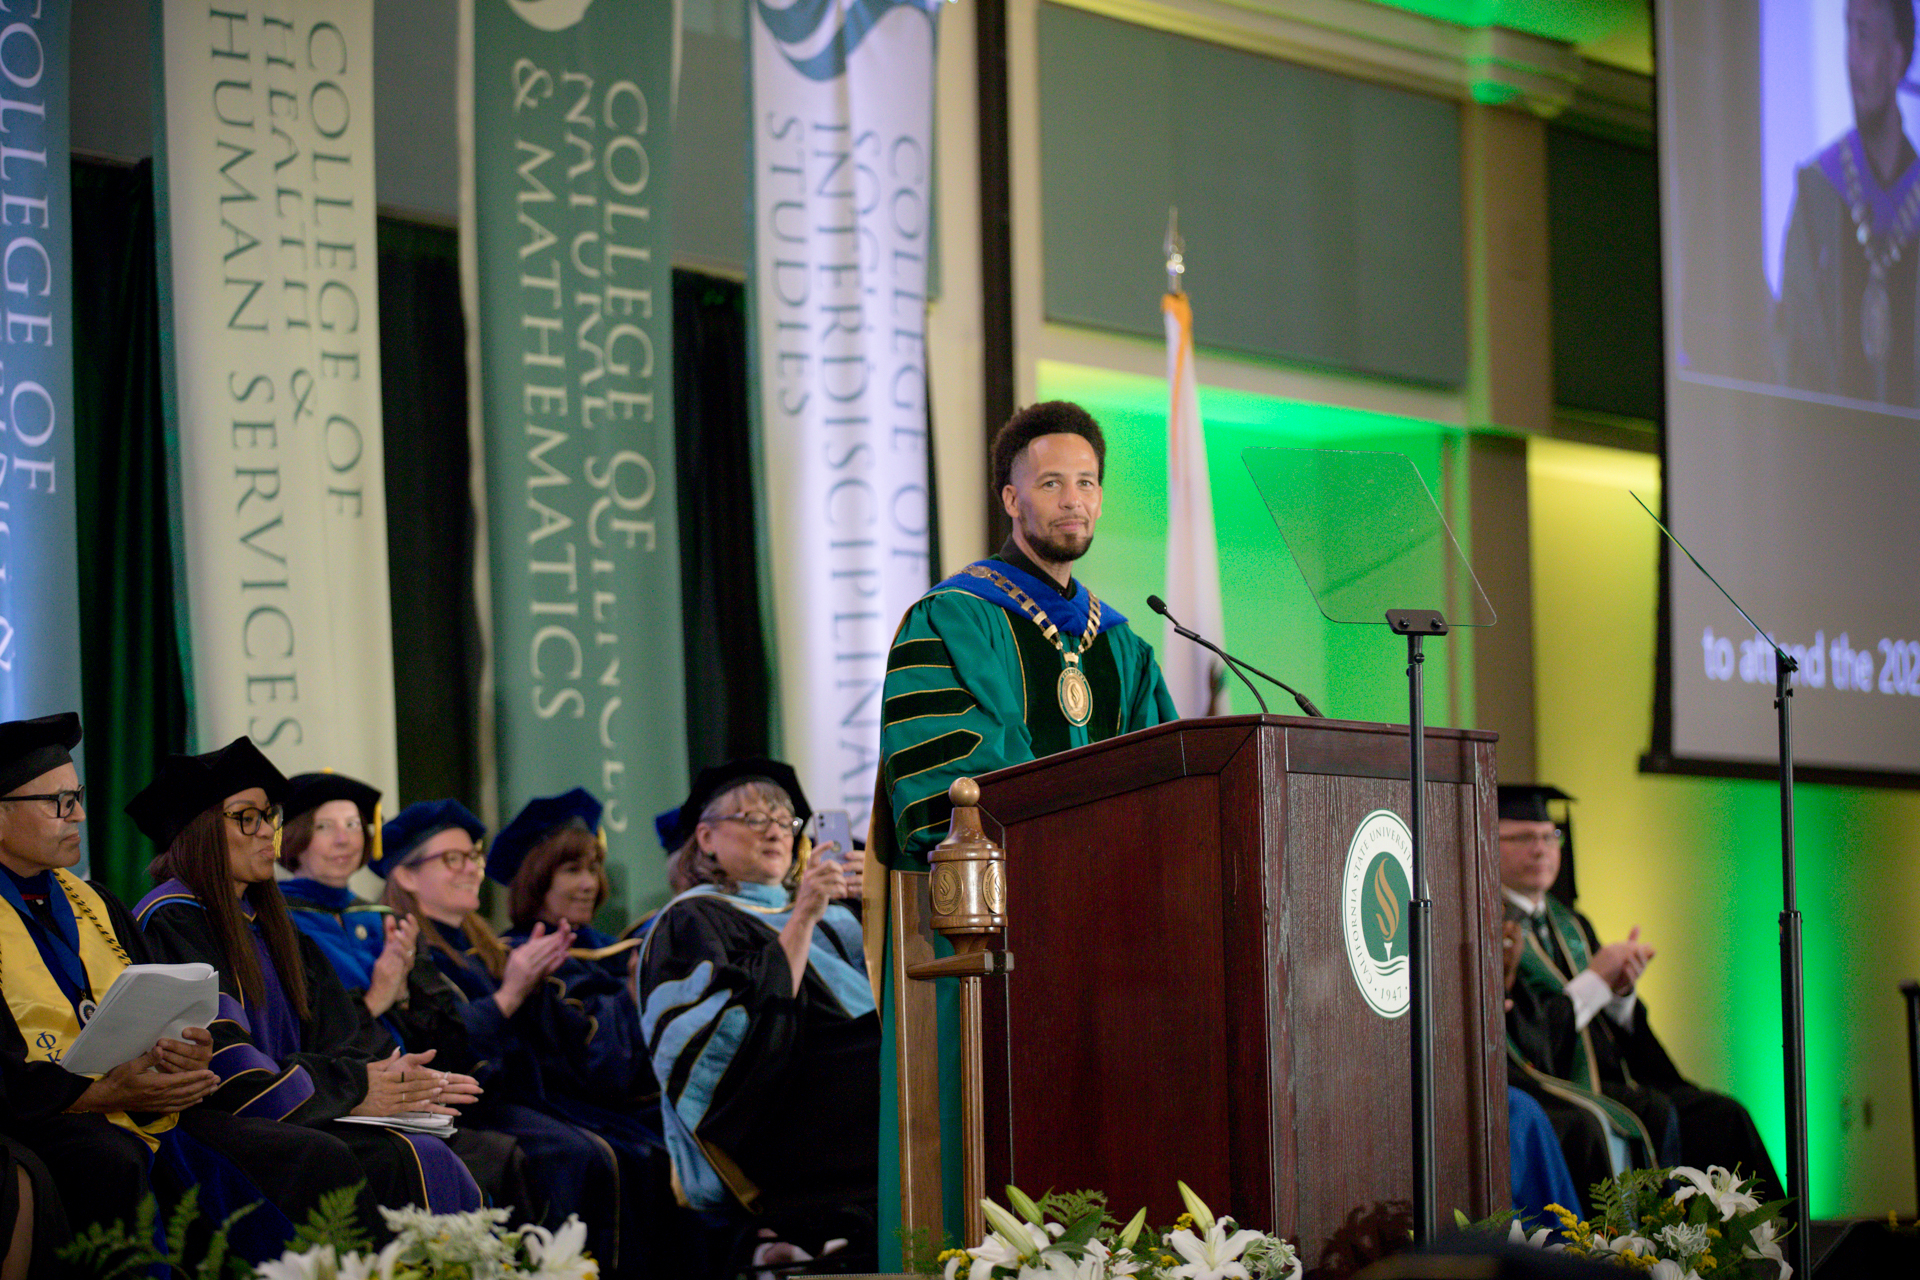 President Wood, college deans and others wore full regalia during the inaugural Convocation ceremonies.